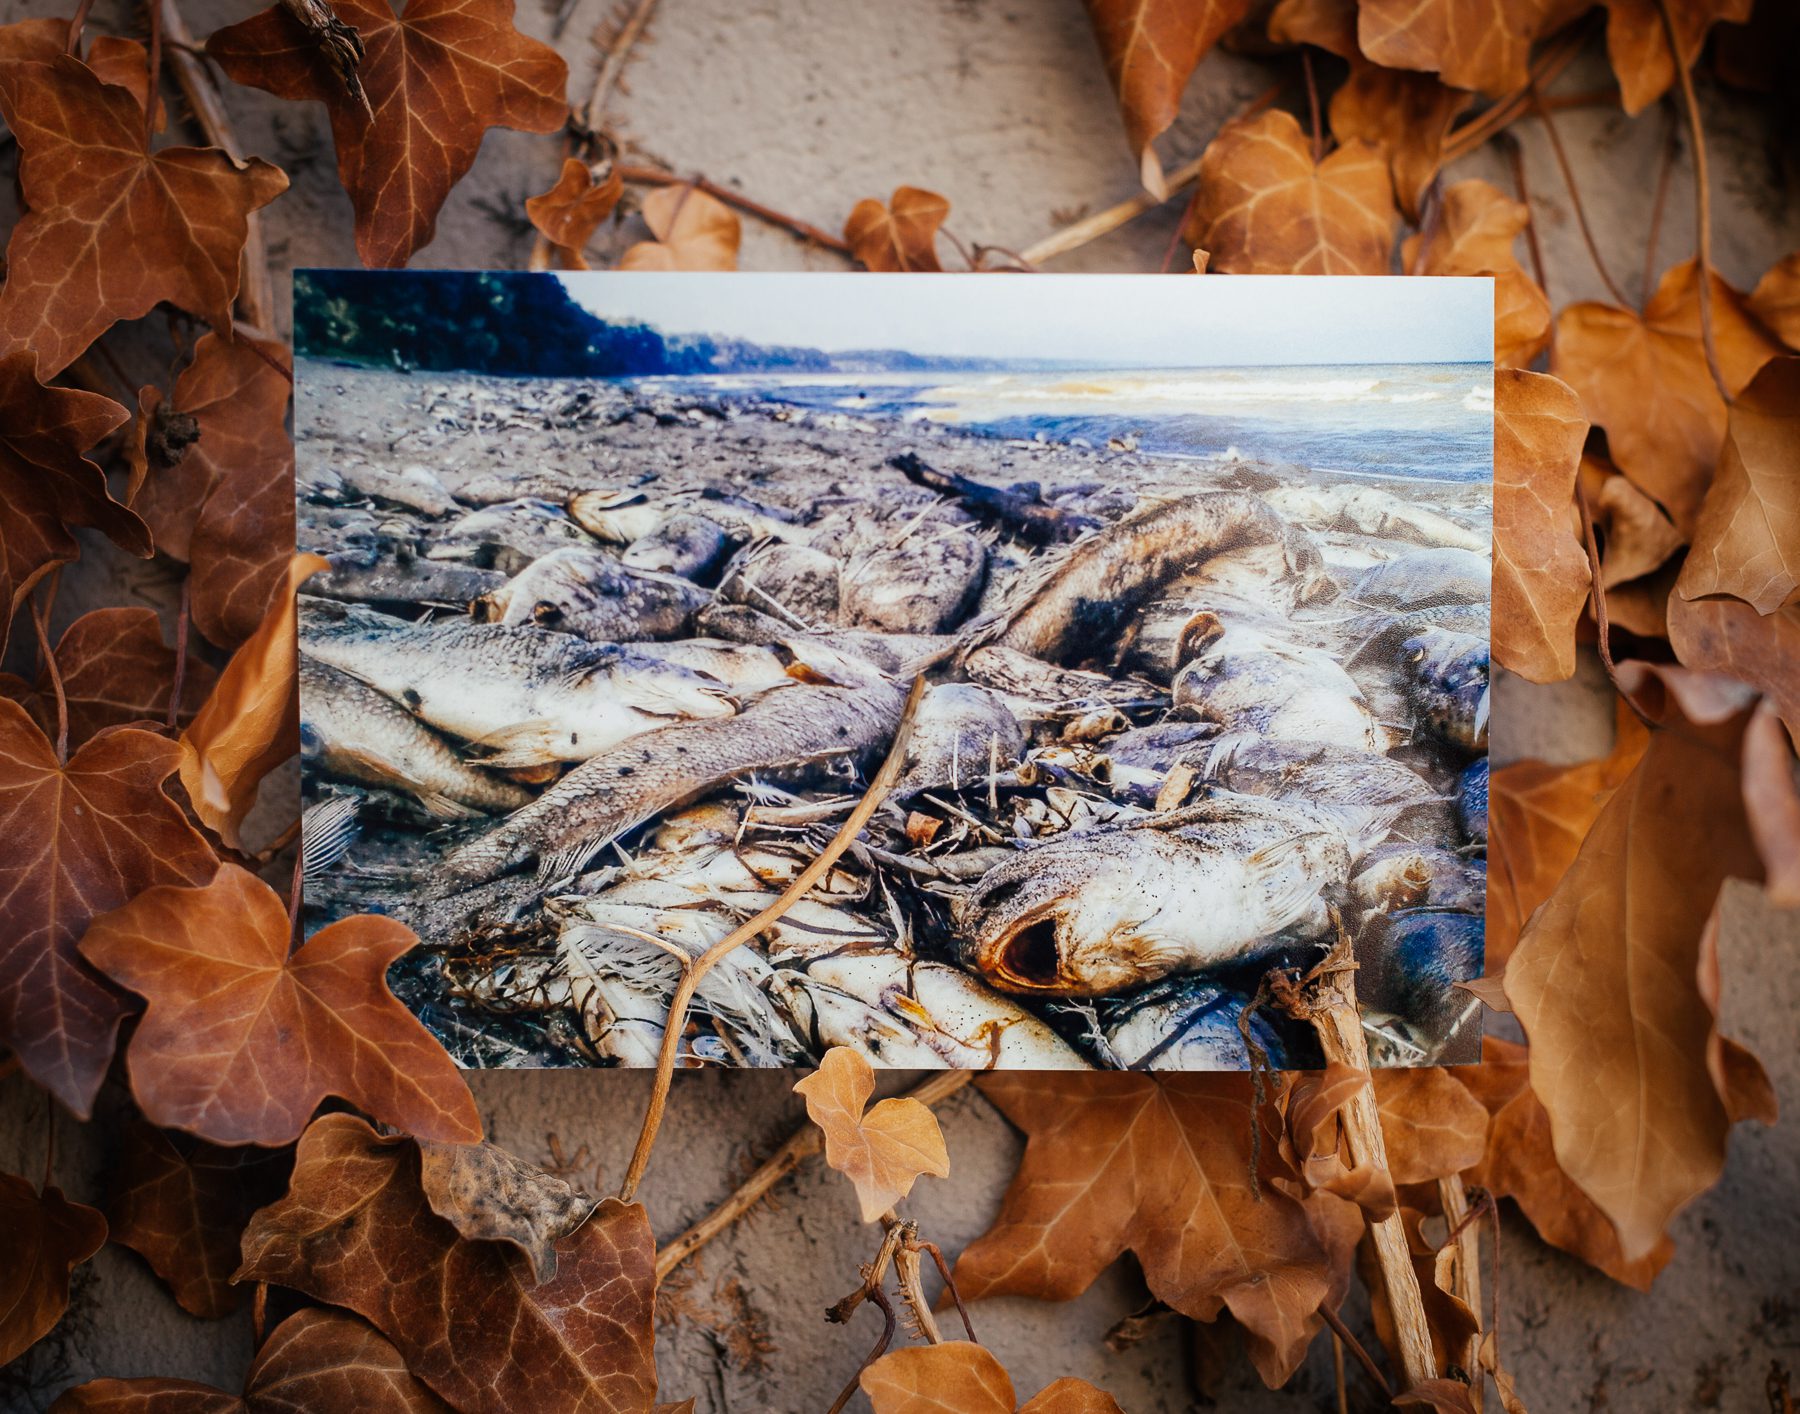 Ken’s photograph of thousands of dead fish washed up on Lake Erie’s shore.